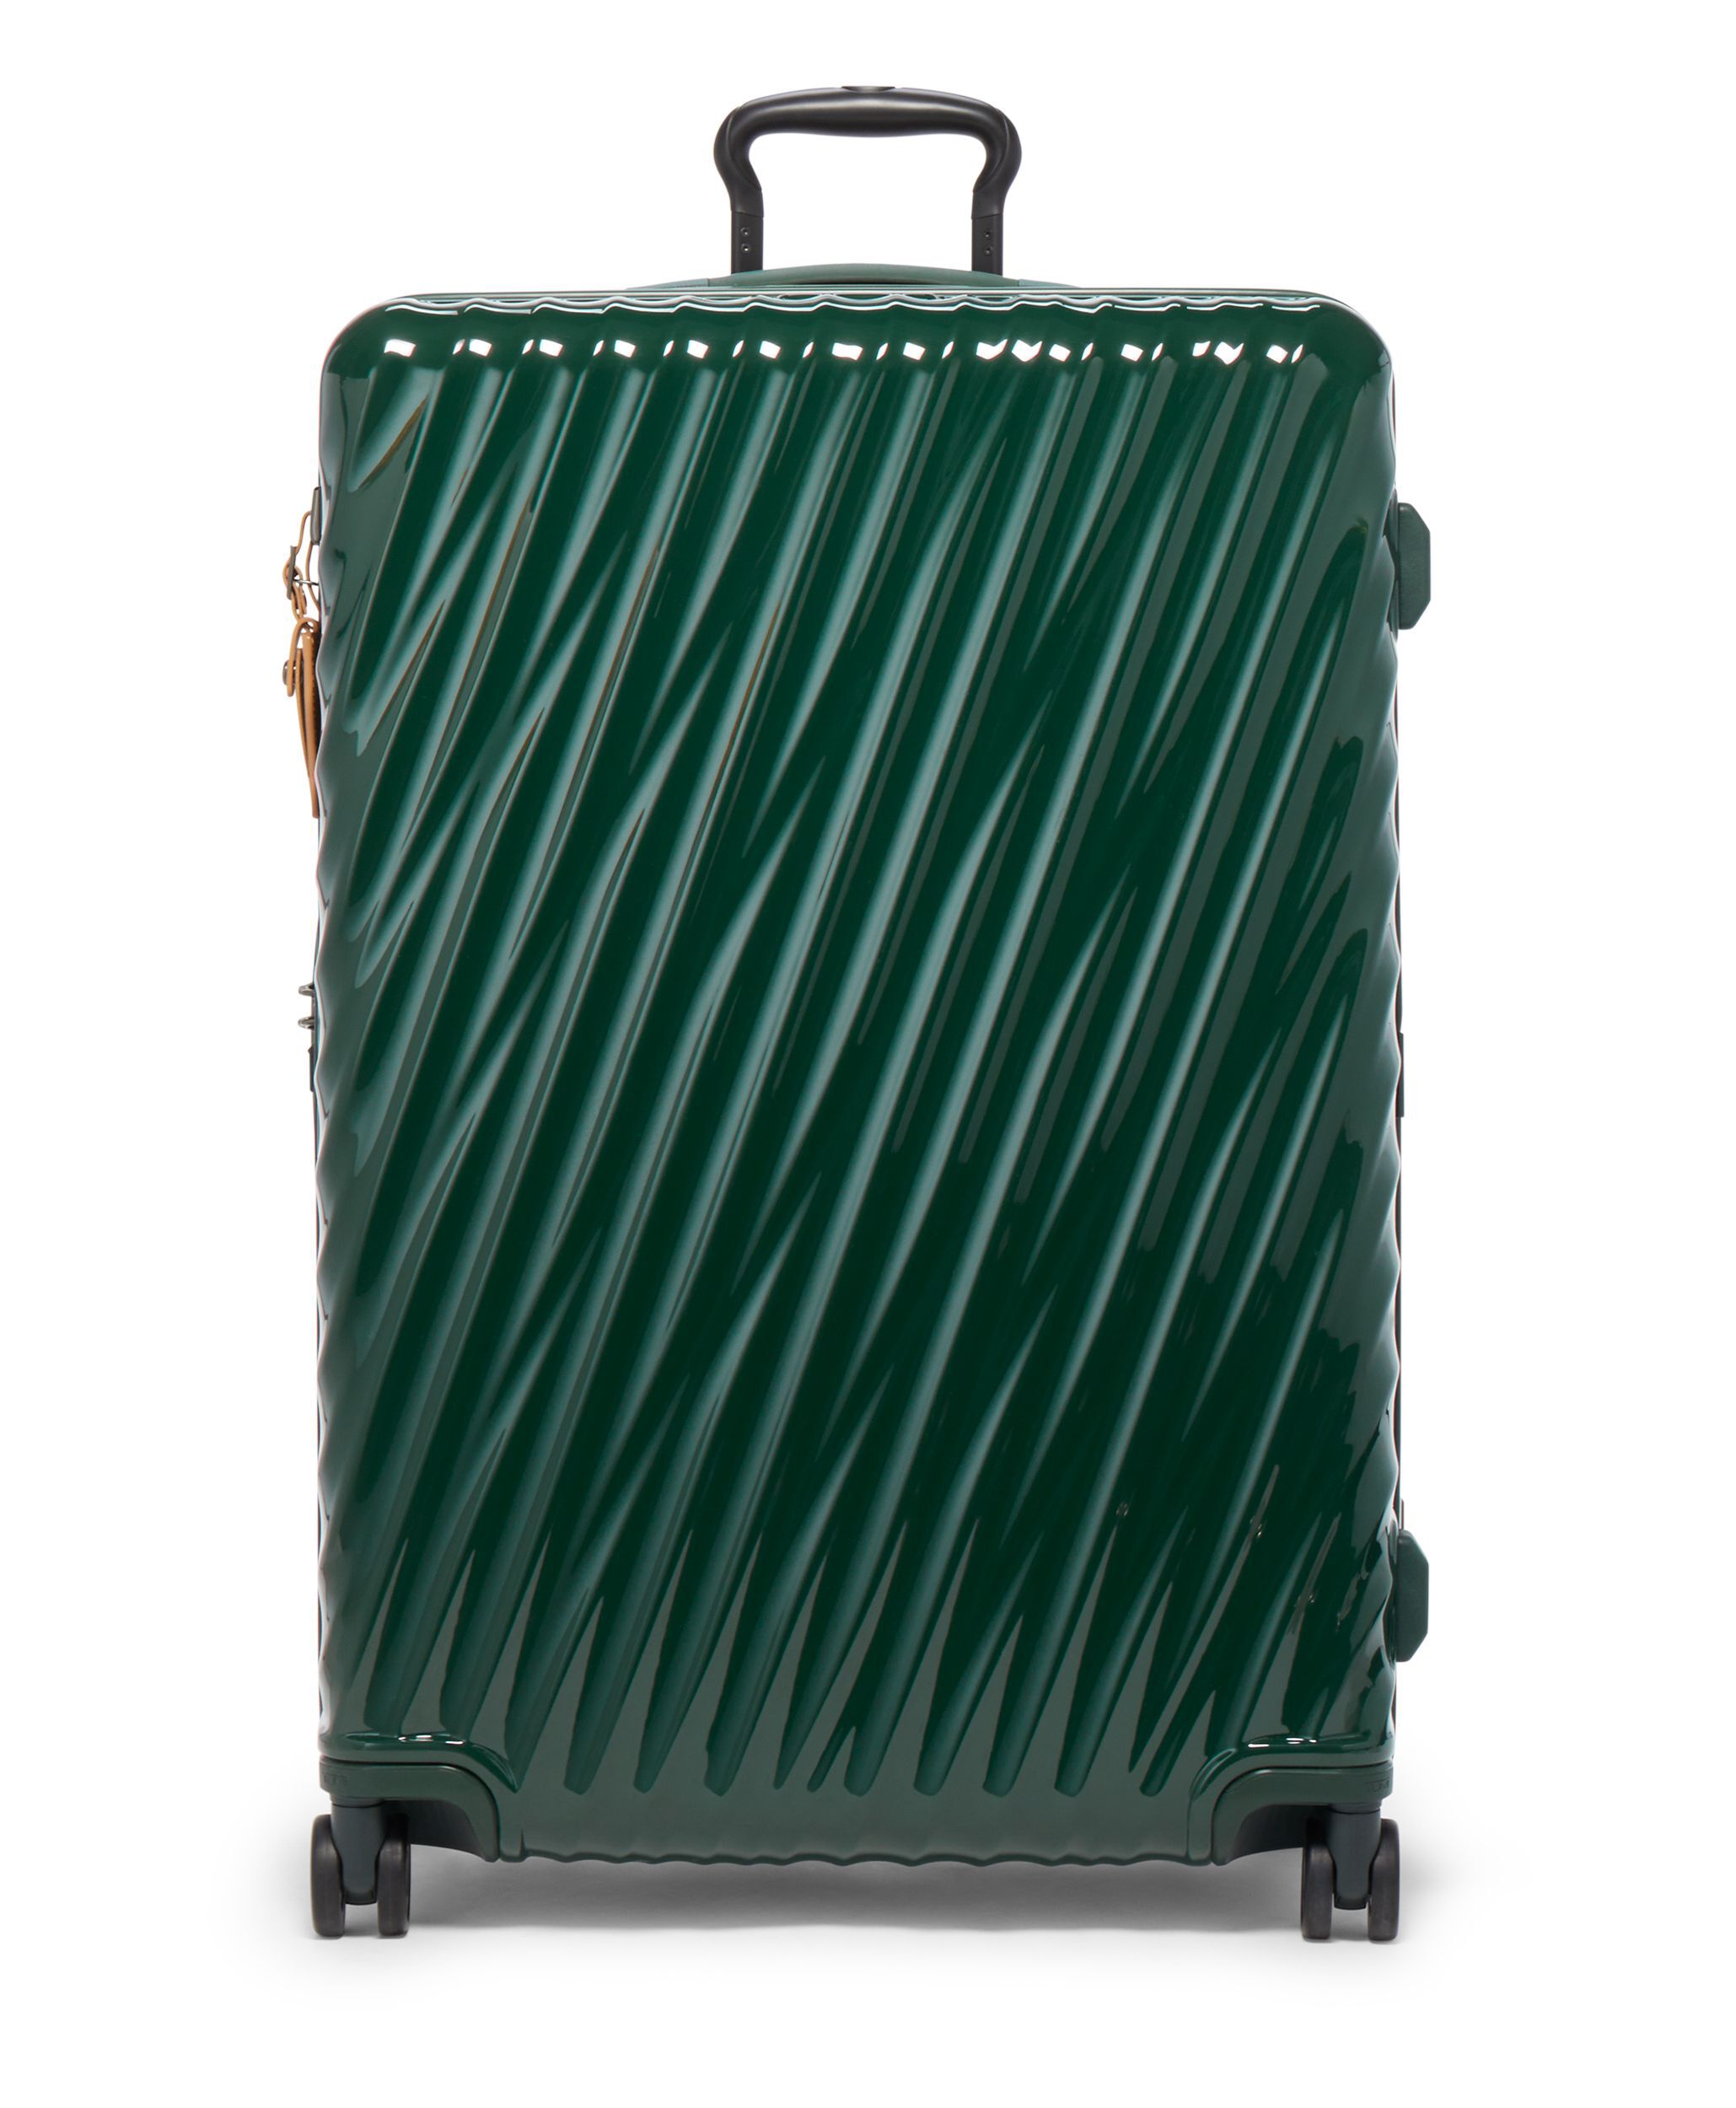 19 Degree Extended Trip Expandable Checked Luggage 77,5 cm | TUMI